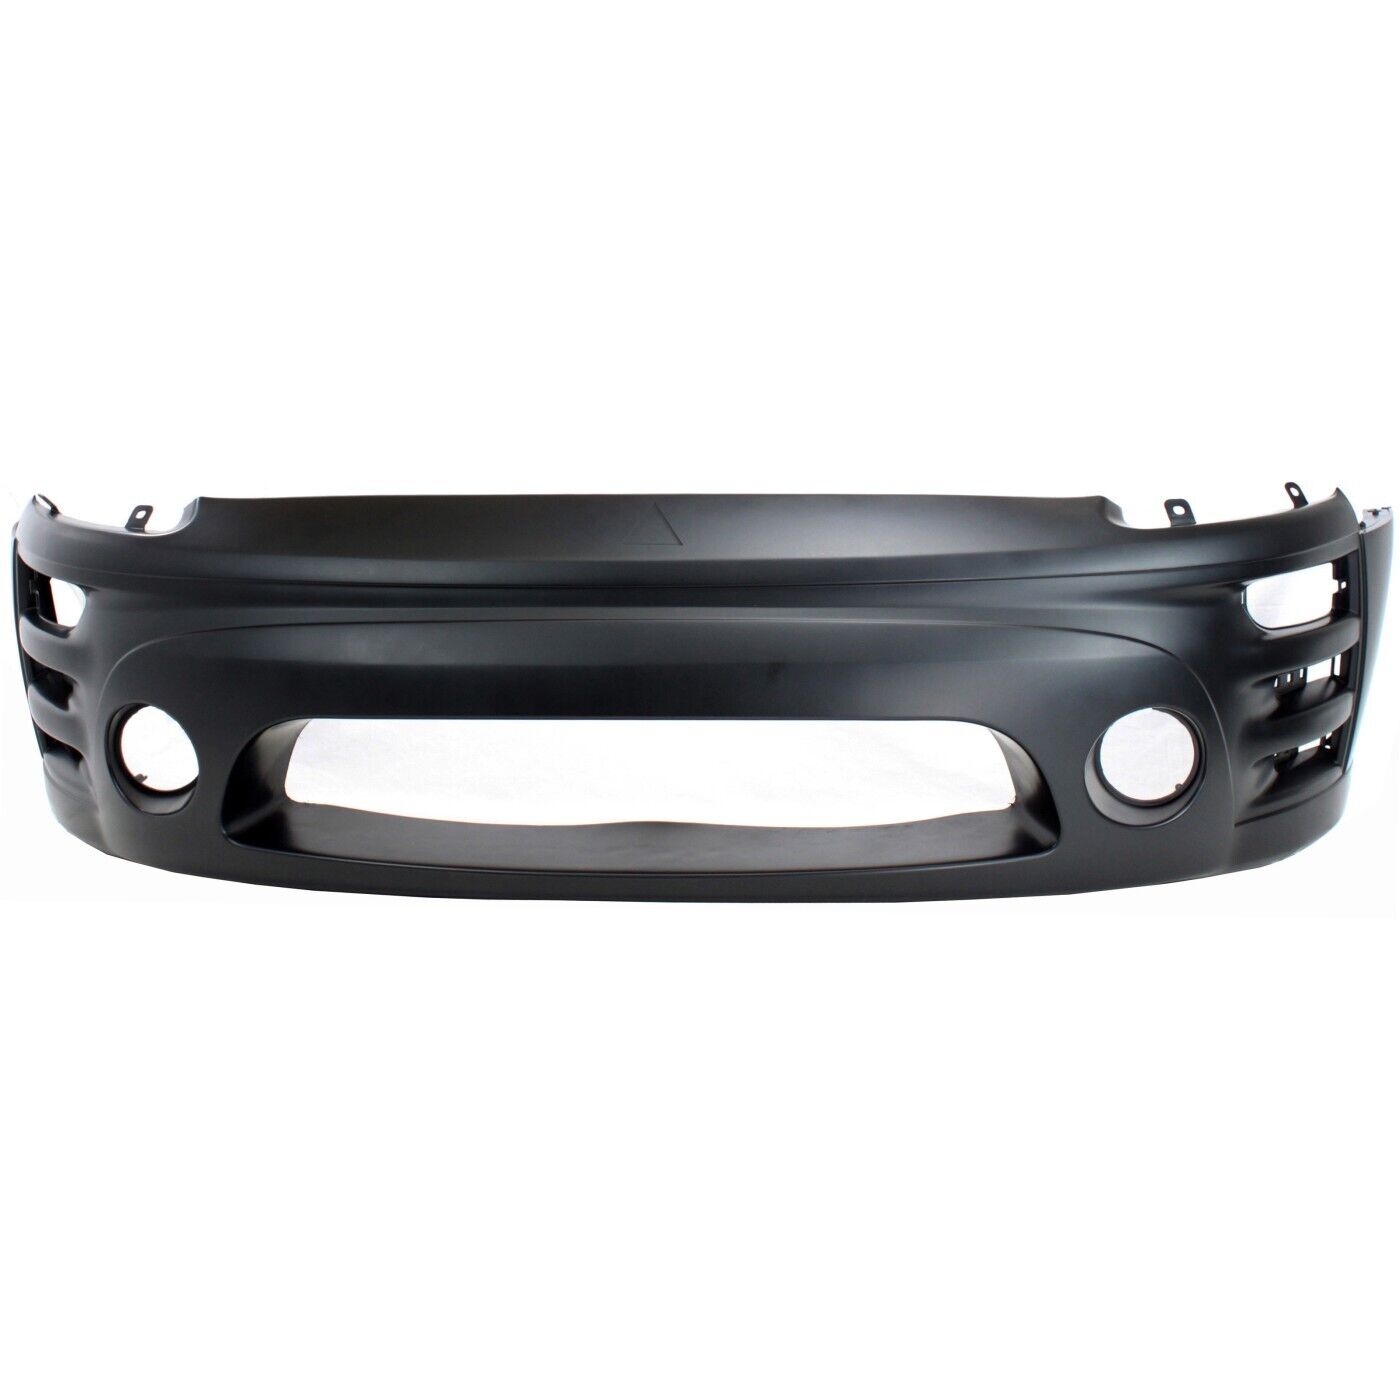 Front Bumper Cover For 2002-2005 Mitsubishi Eclipse with Fog Lamp Holes 6400B280